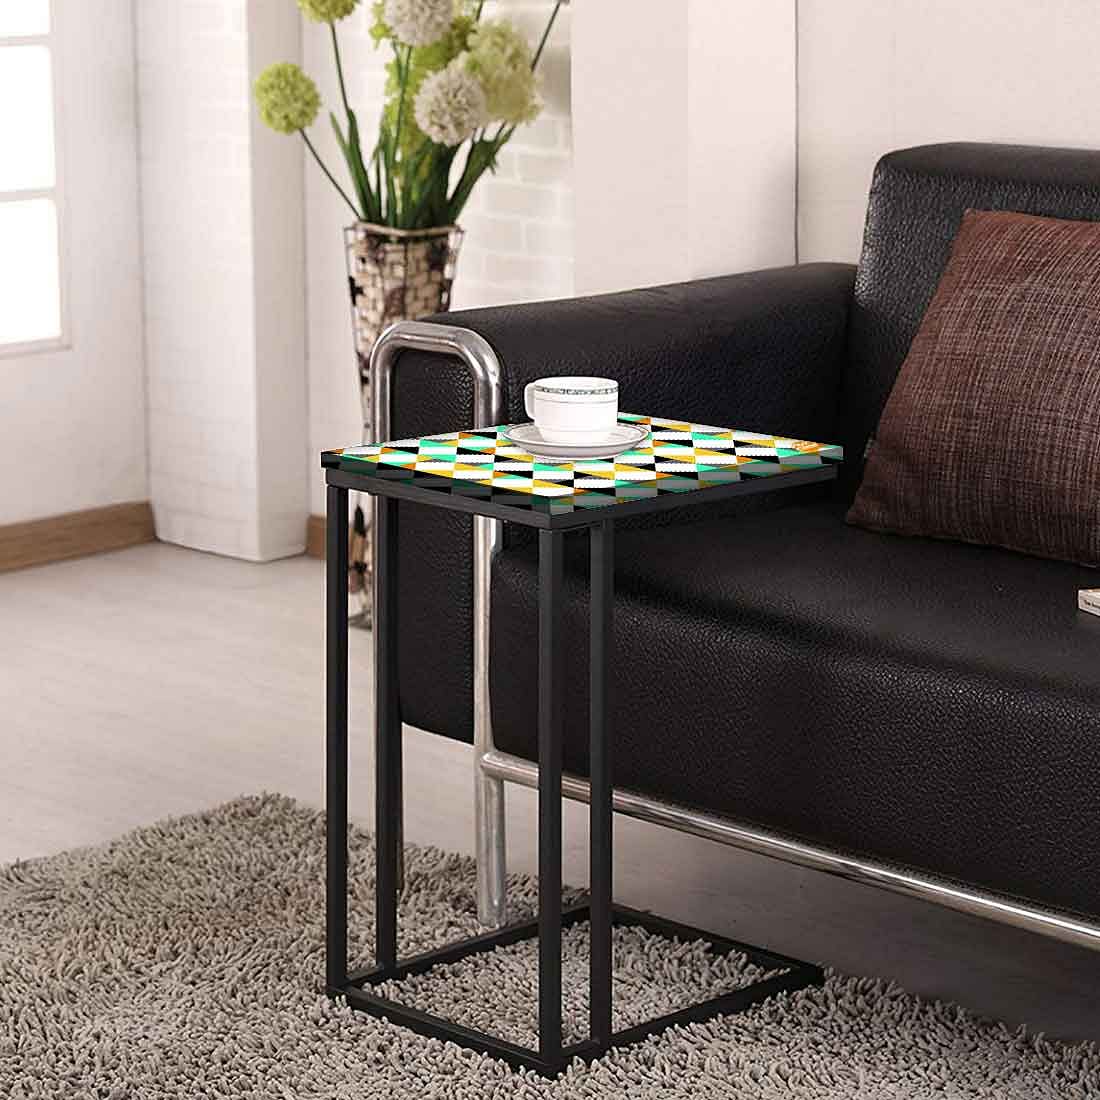 Metal Outdoor C Table For Sofa - Colorful Diamond Pattern Nutcase